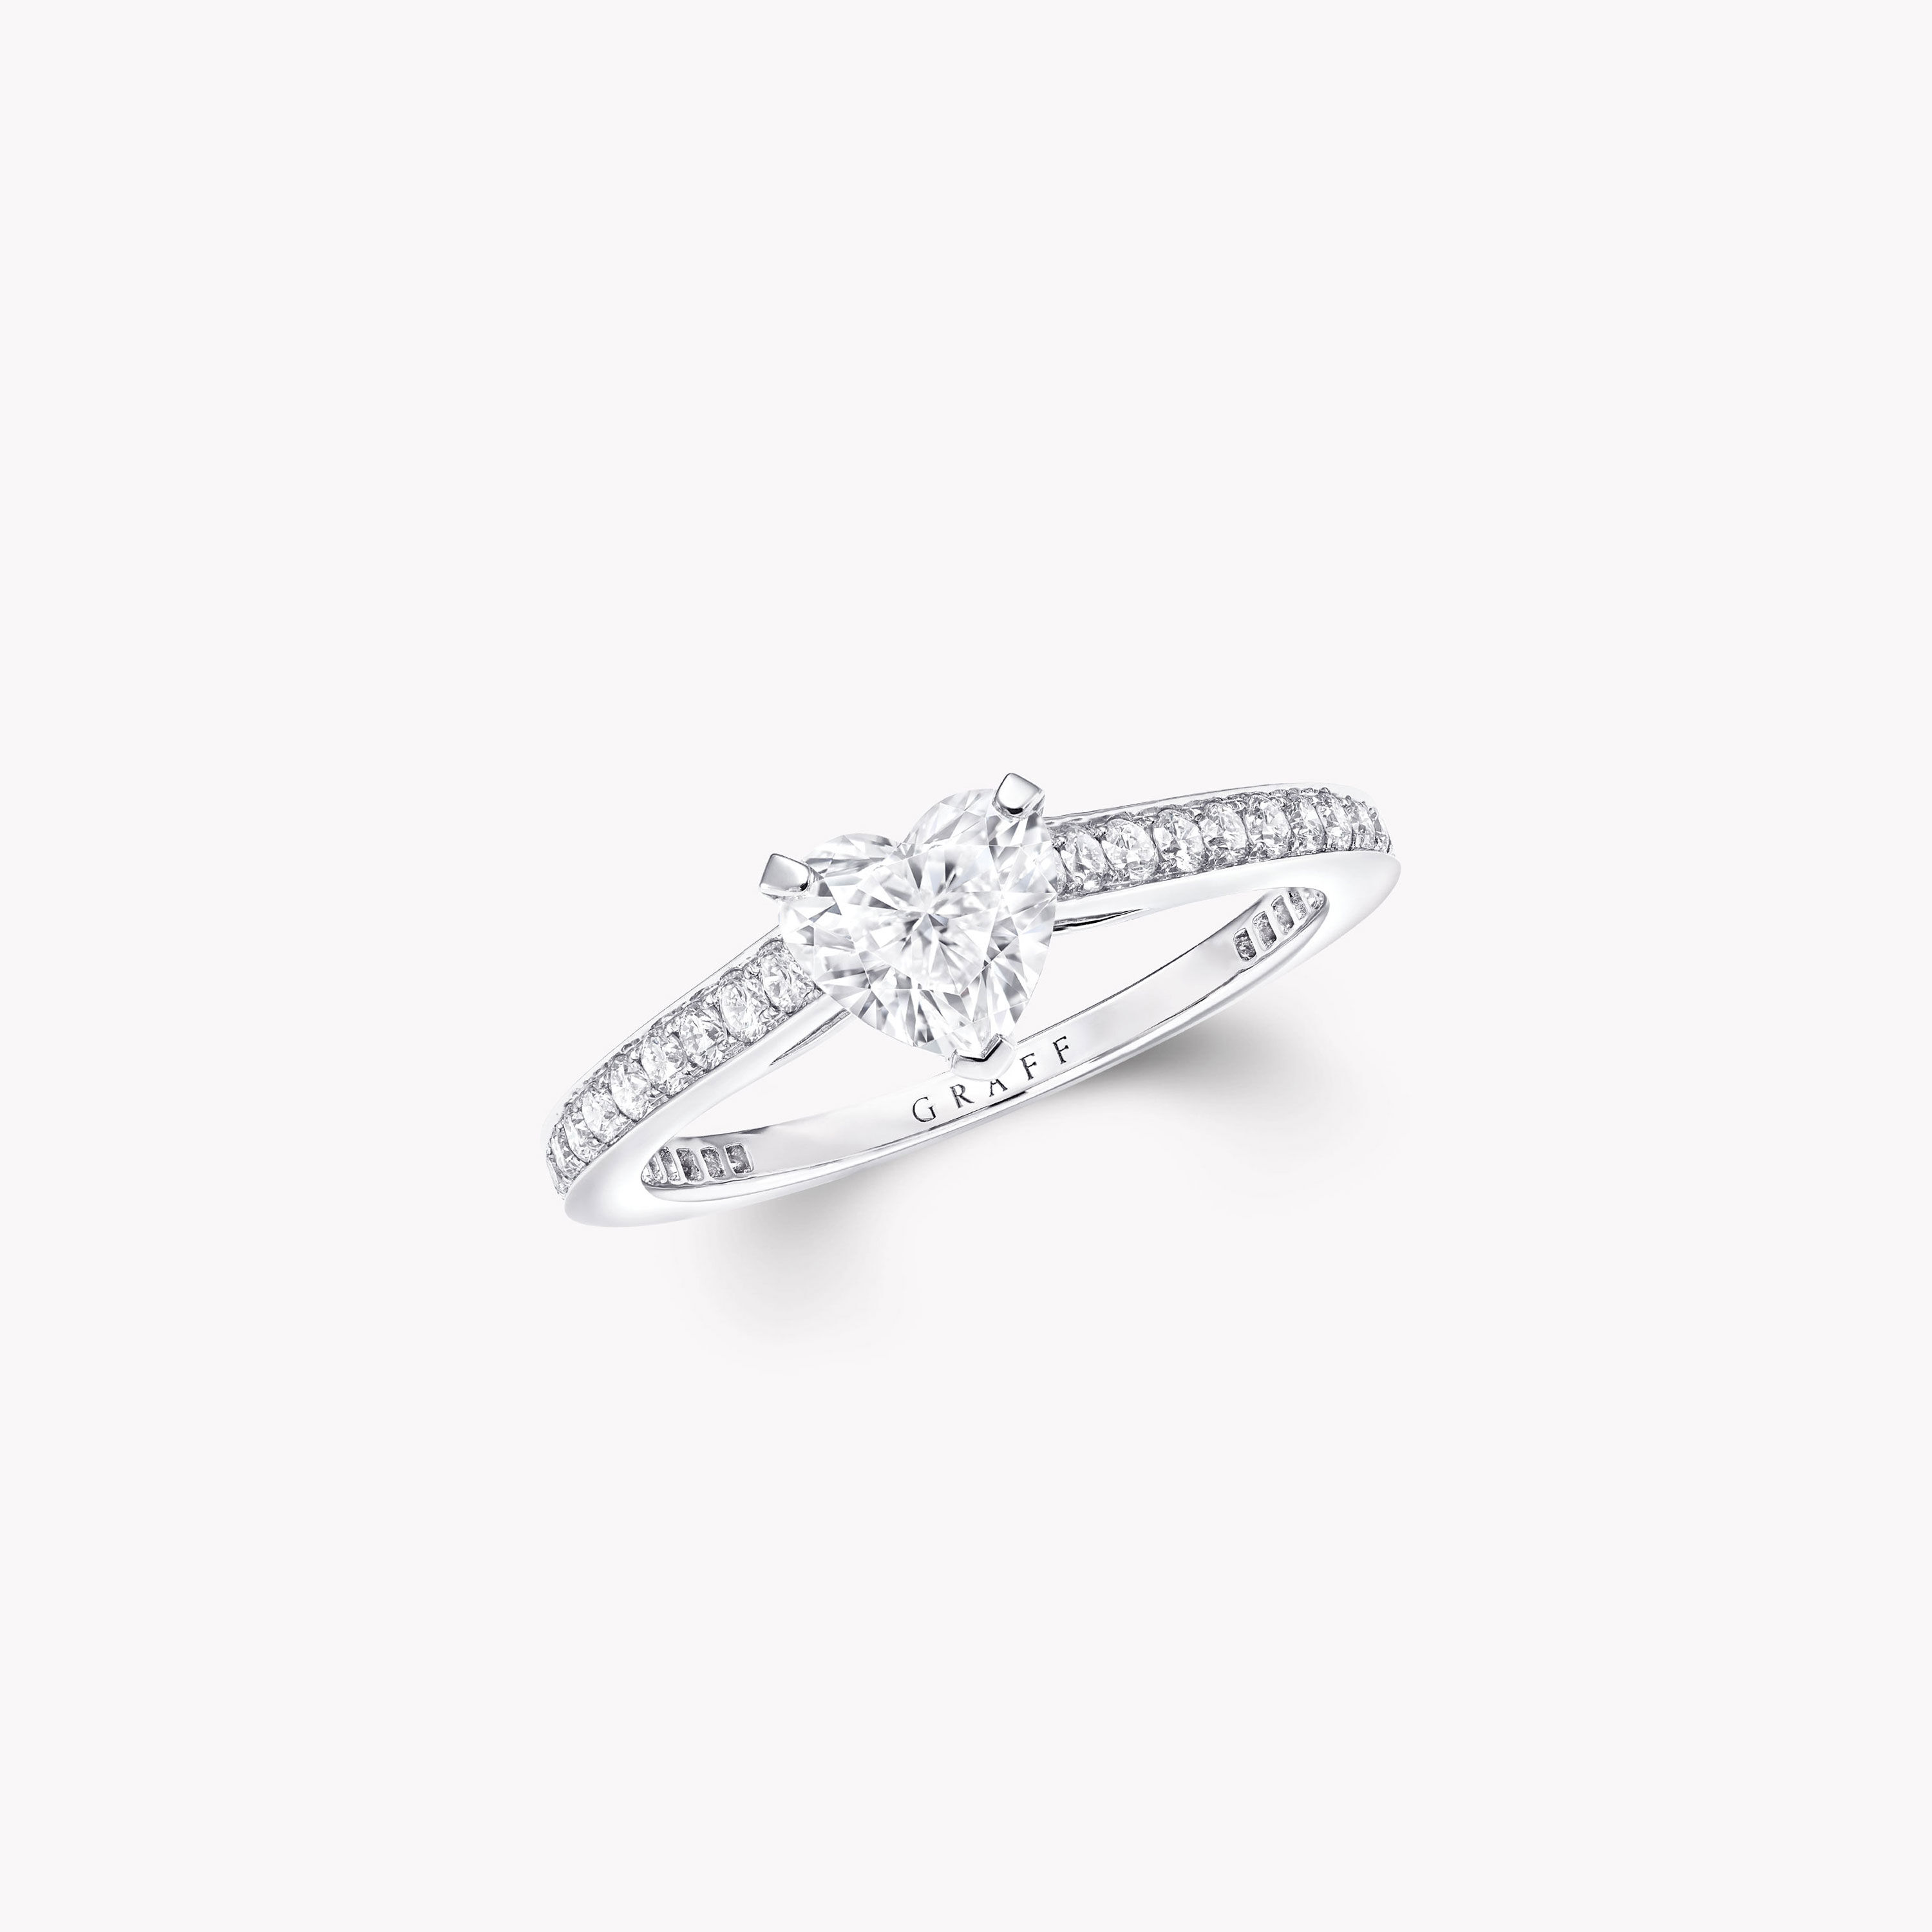 The Most Amazing Heart Solitaire Engagement Rings Which Stole Our Hearts! |  WedMeGood